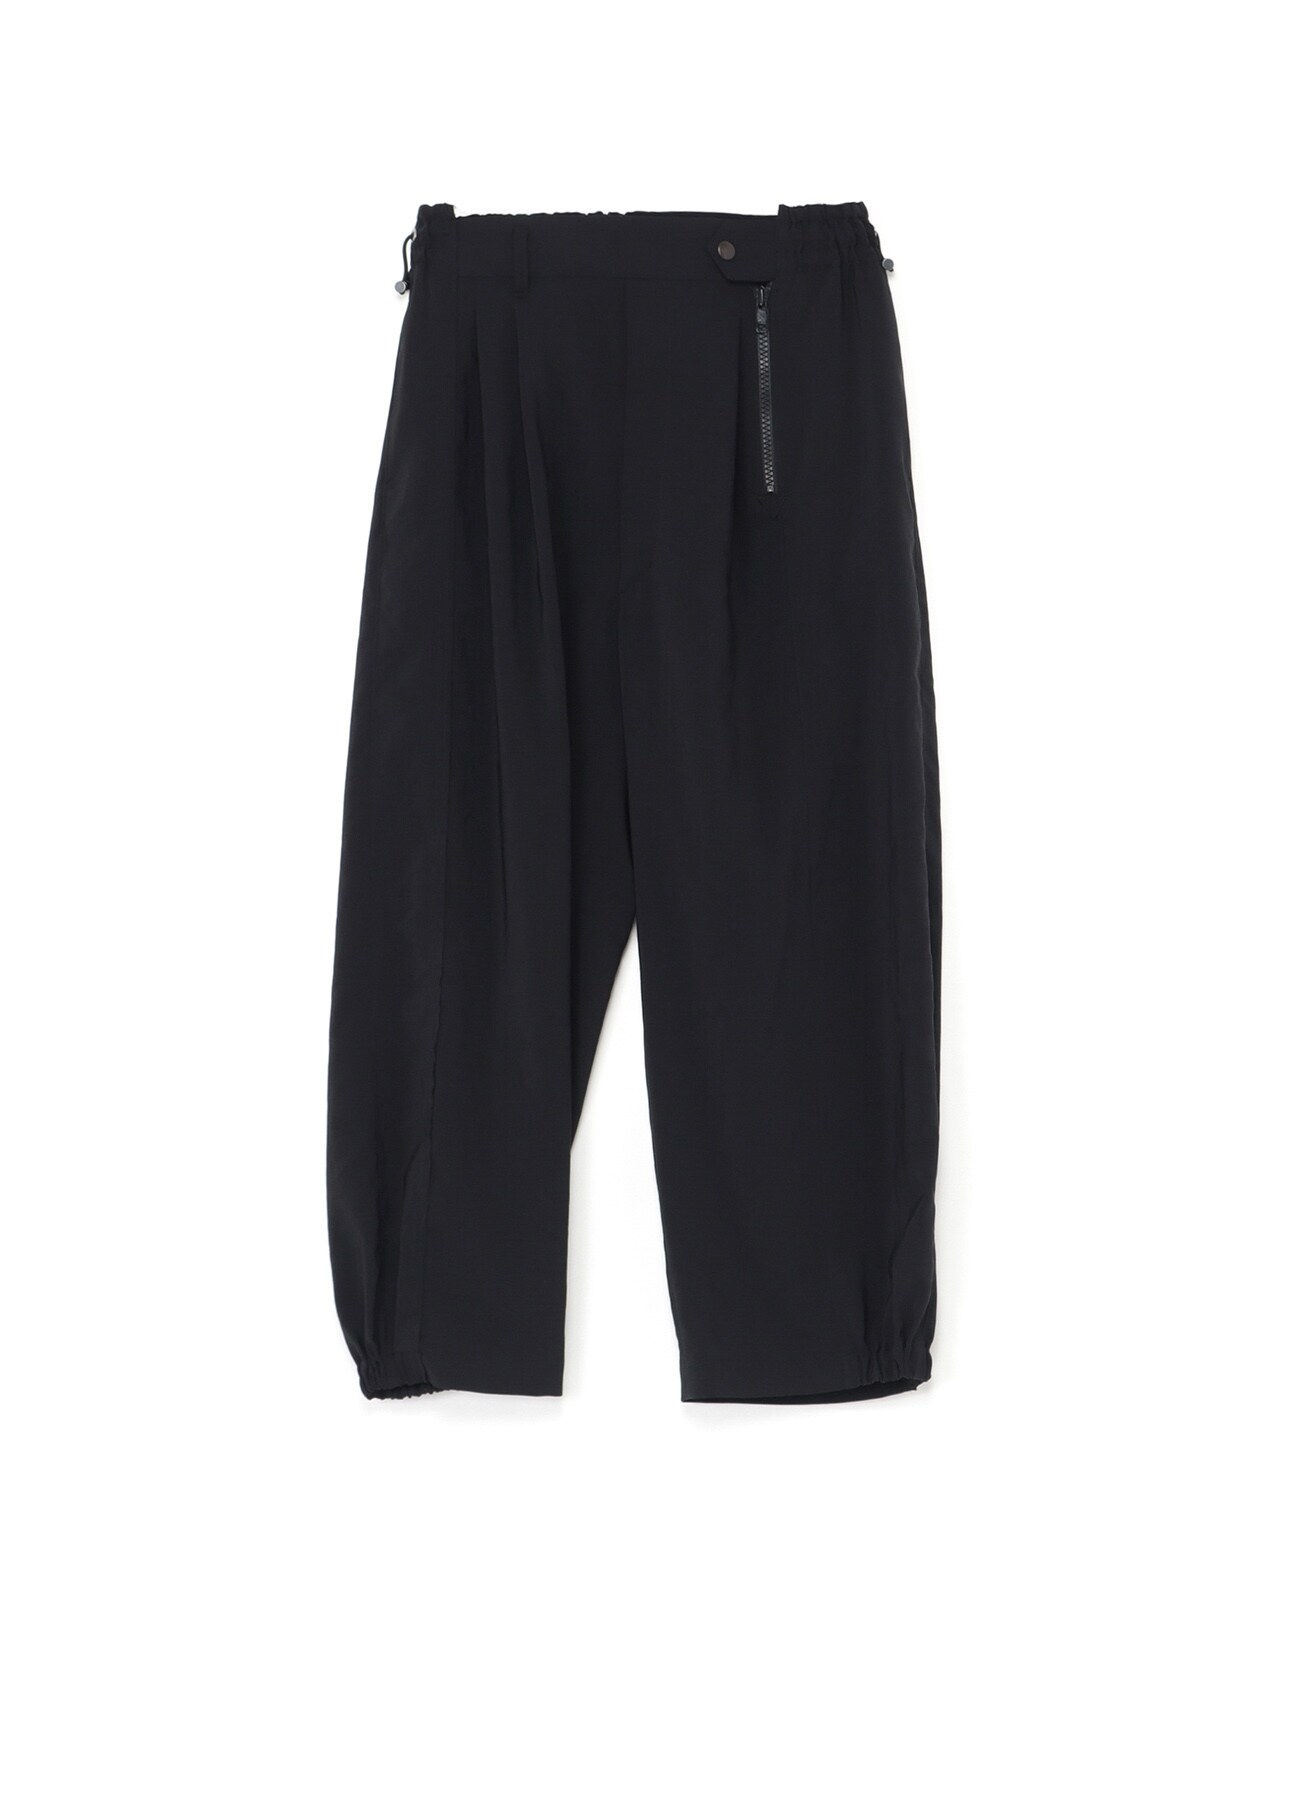 HIGH-TWIST POLYESTER PANELLED PANTS WITH ADJUSTABLE WAISTBAND